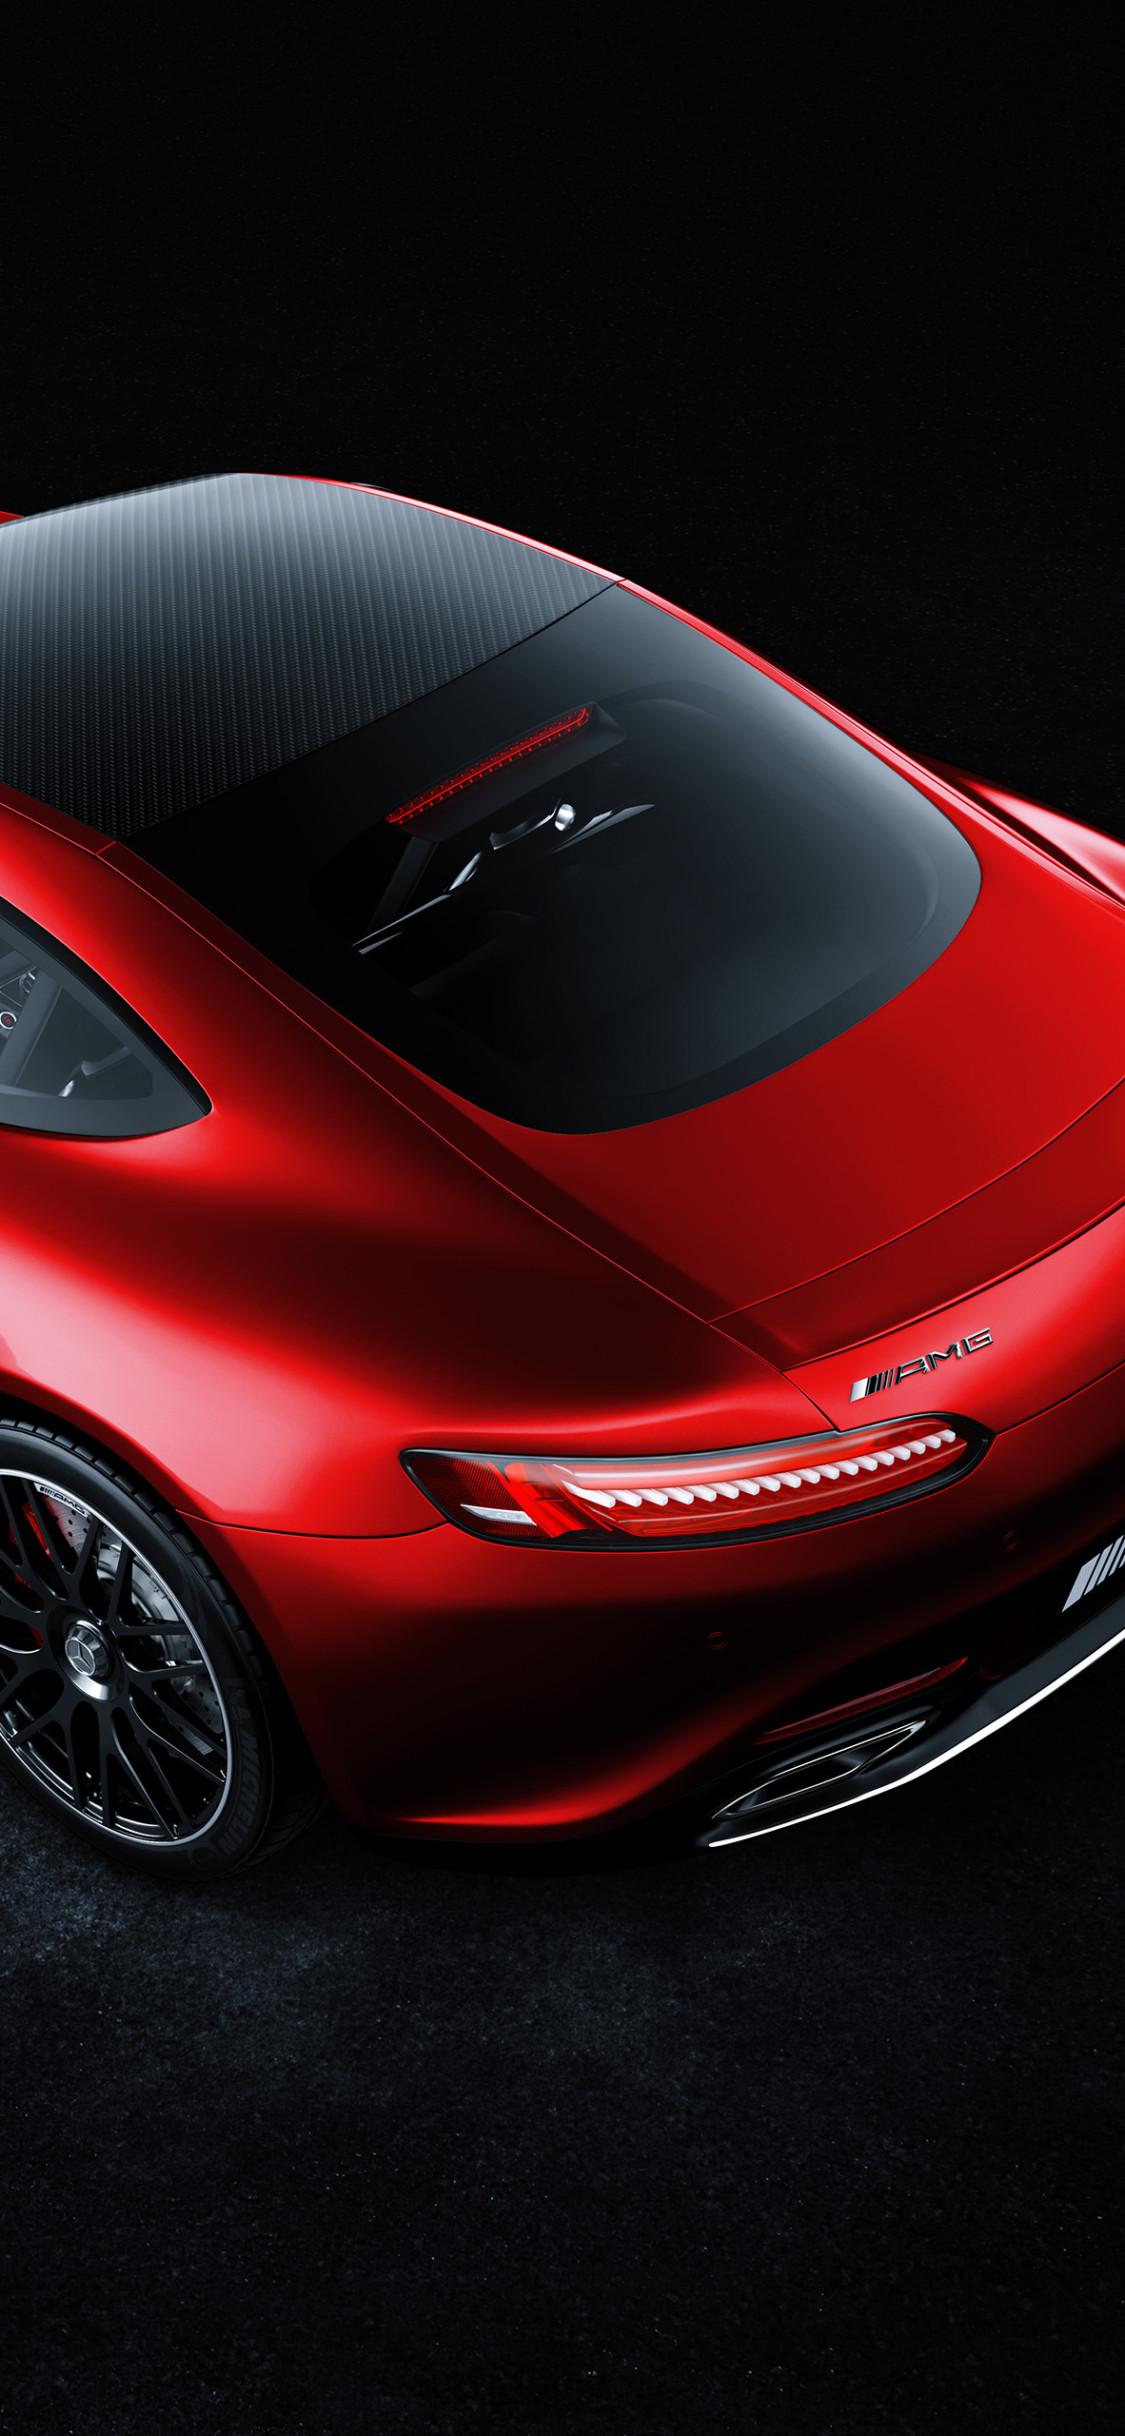 Red Mercedes Benz Amg GT 4k iPhone XS, iPhone iPhone X